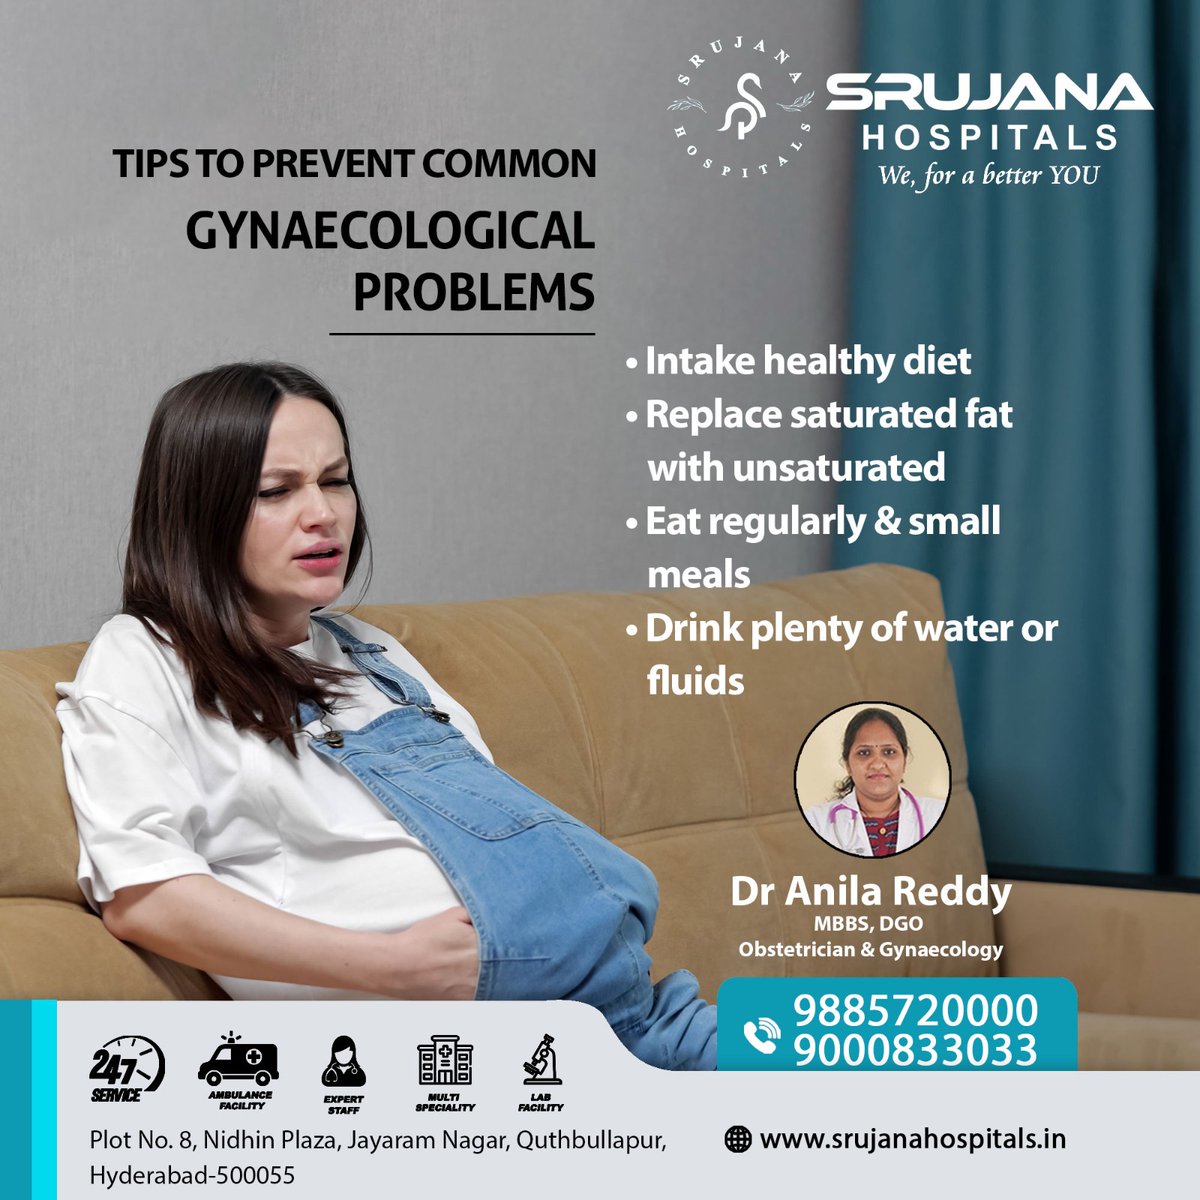 Tips to prevent common Gynaecological problems Phone : 𝟗𝟖𝟖𝟓𝟕𝟐𝟎𝟎𝟎𝟎/𝟗𝟎𝟎𝟎𝟖𝟑𝟑𝟎𝟑𝟑 #Srujanahospitals #Quthbullapur #Gynecology #WomensHealth #GyneHealth #GynProblems #GynCare #SelfCare